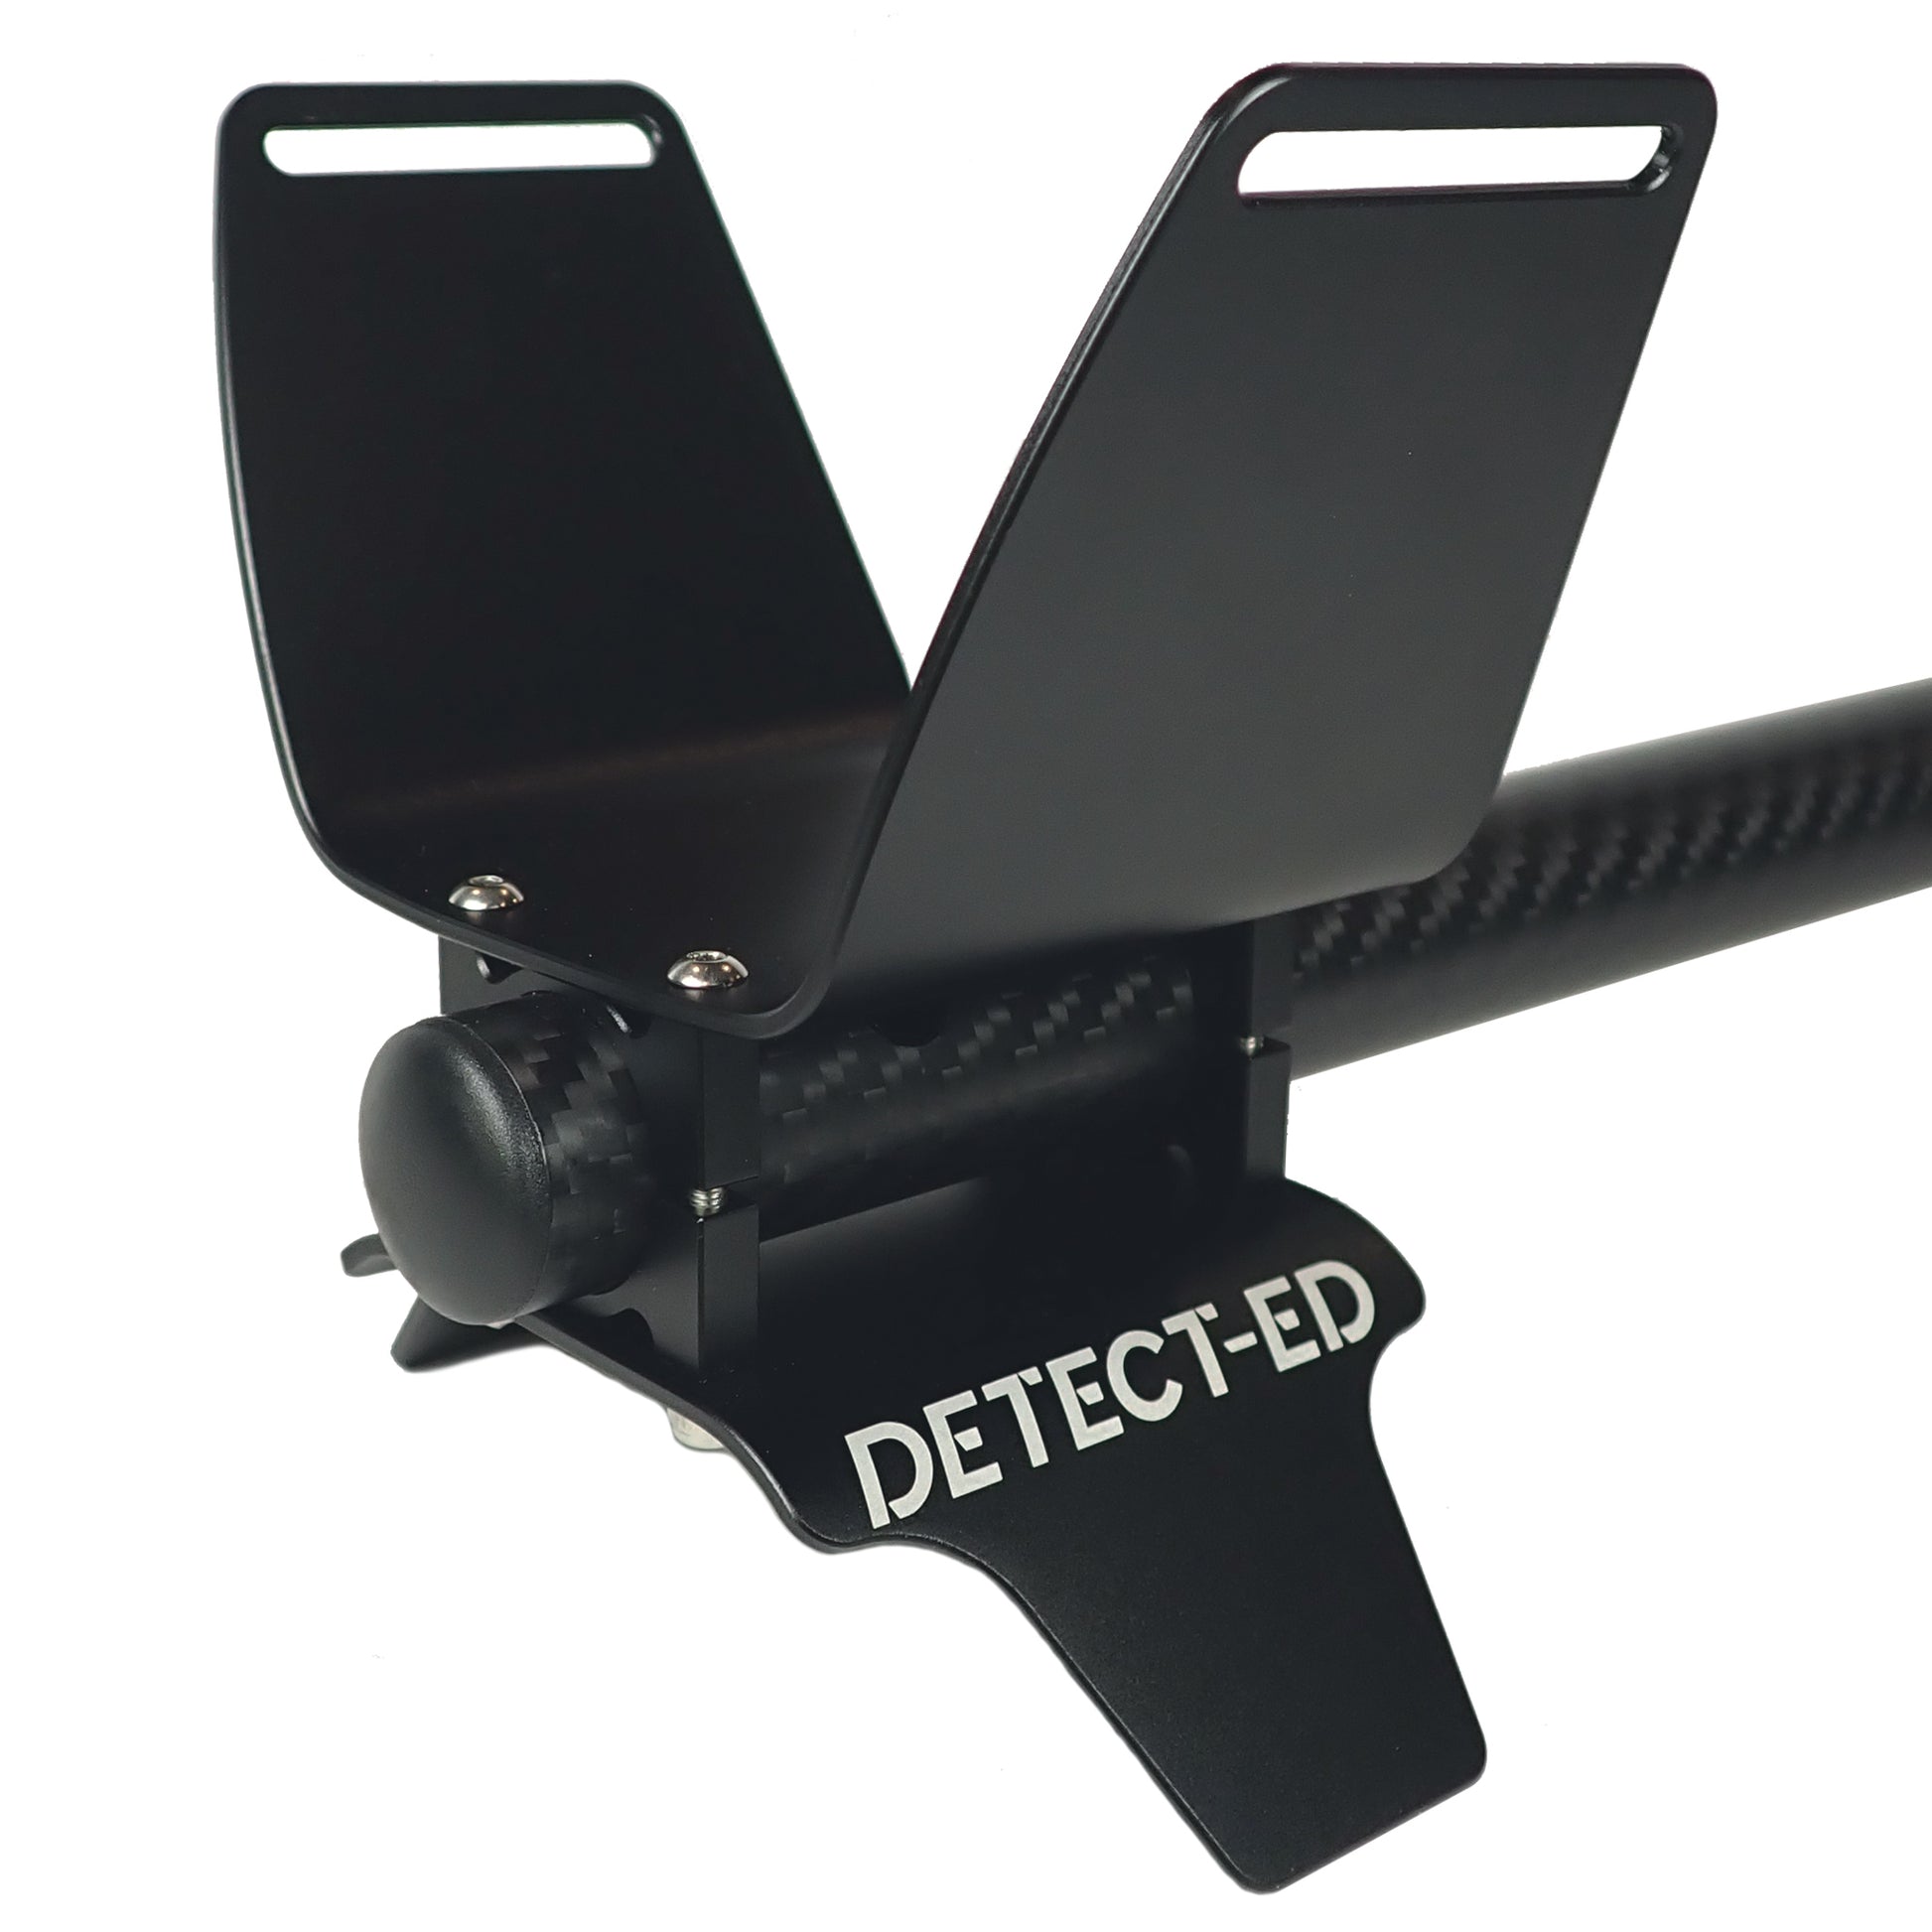 Detect-Ed Arm Cuff Upgrade for Minelab Equinox Metal Detector | Universal Fits 22mm Shafts